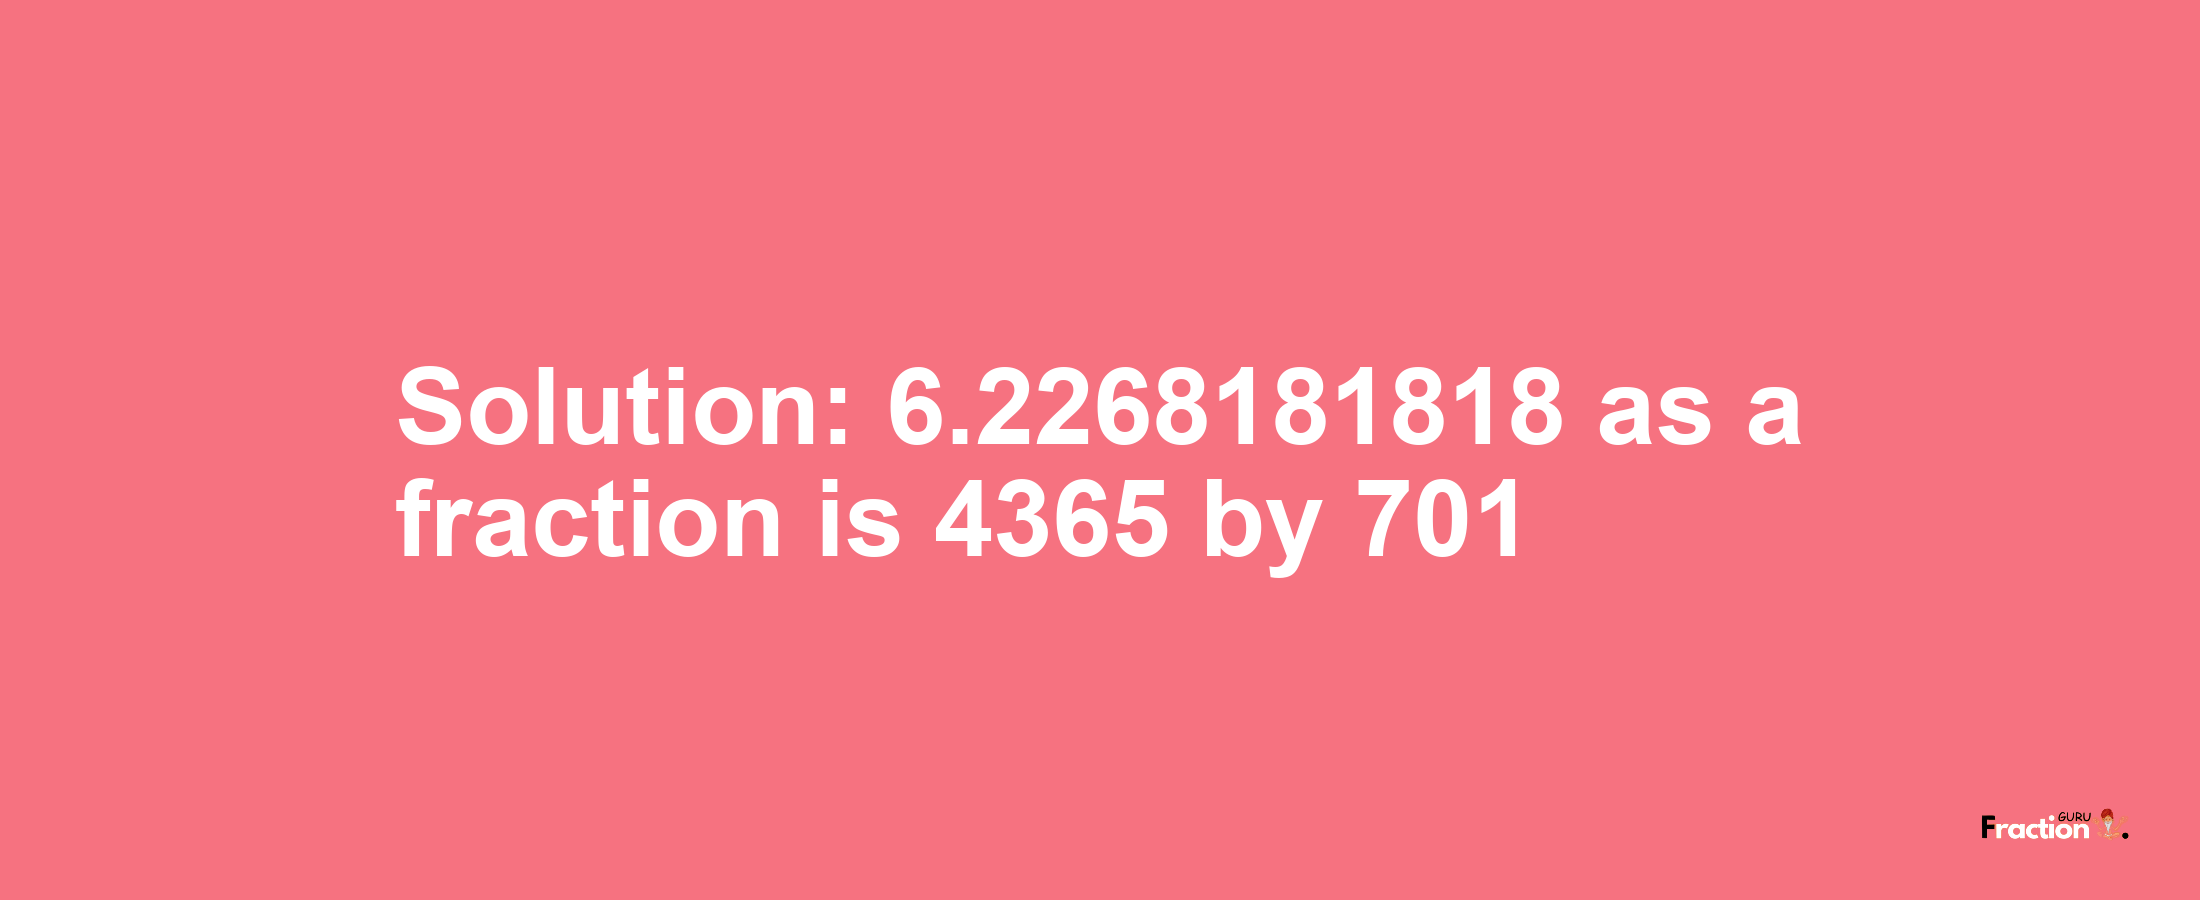 Solution:6.2268181818 as a fraction is 4365/701